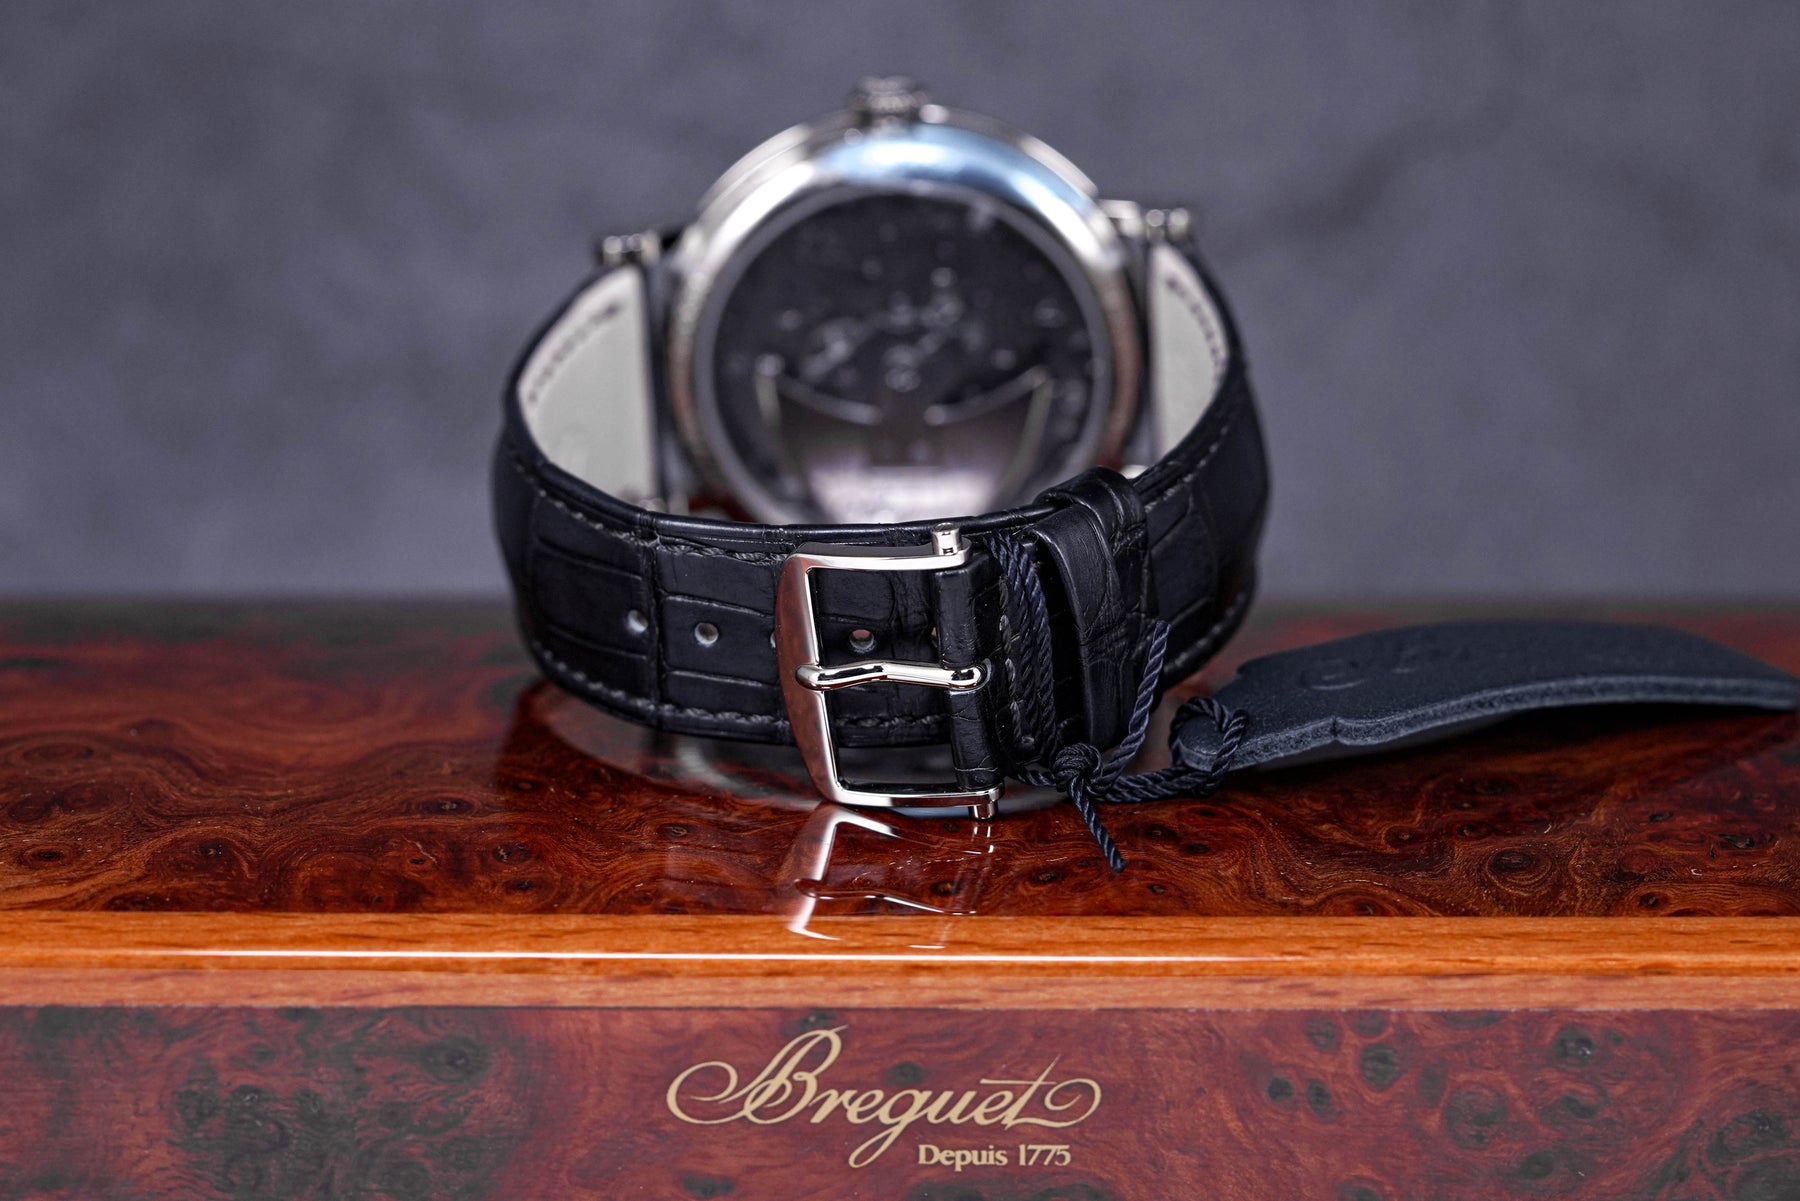 Breguet Tradition 7597 Anthracite